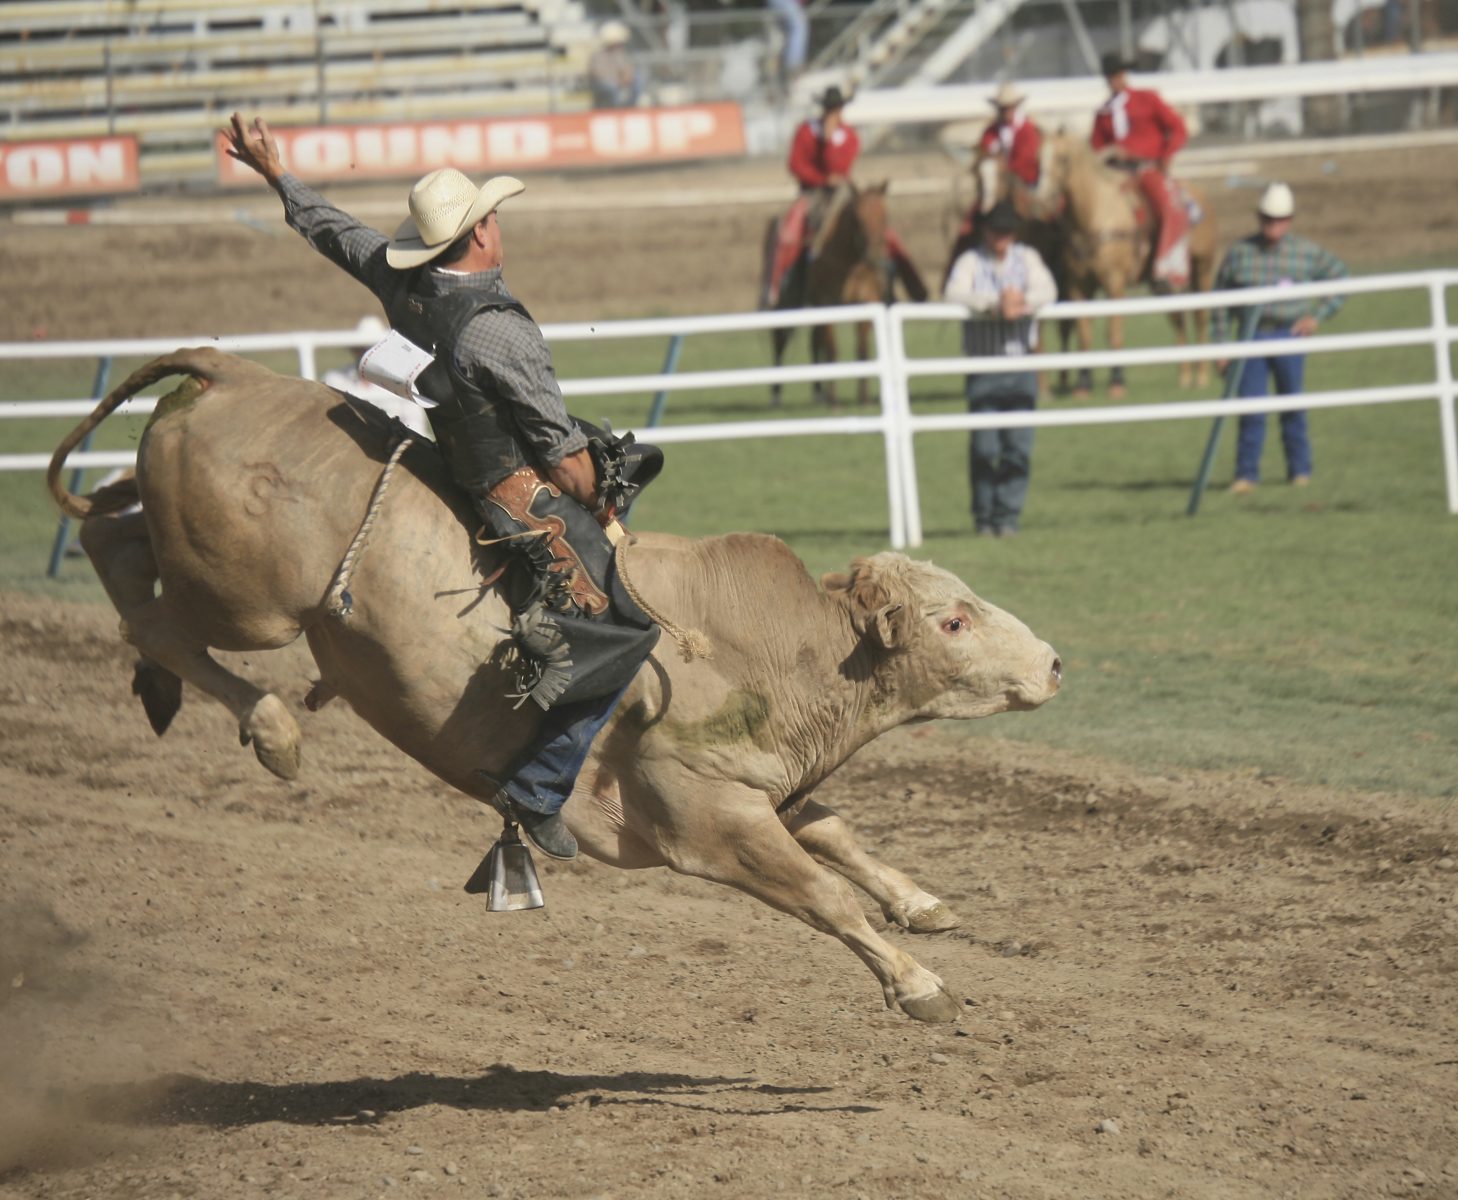 Wisconsin River Pro Rodeo comes to Merrill this weekend